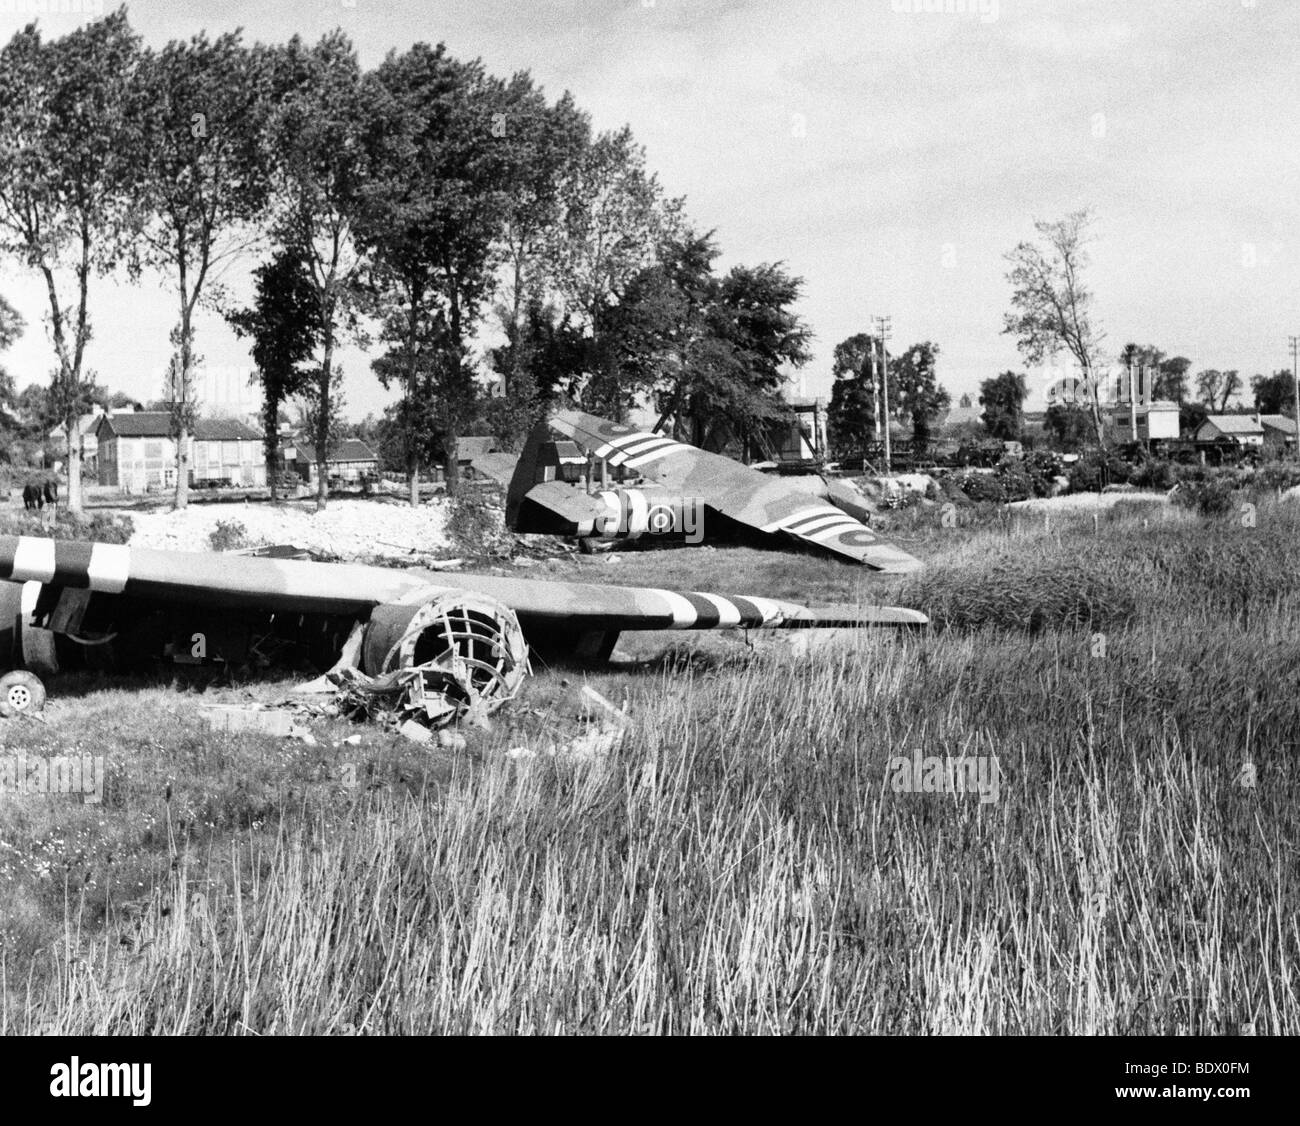 6 JUNE 1944 - Pegasus Bridge: No 1 glider (in background) piloted by Jim Wallwork is within feet of the planned target Stock Photo